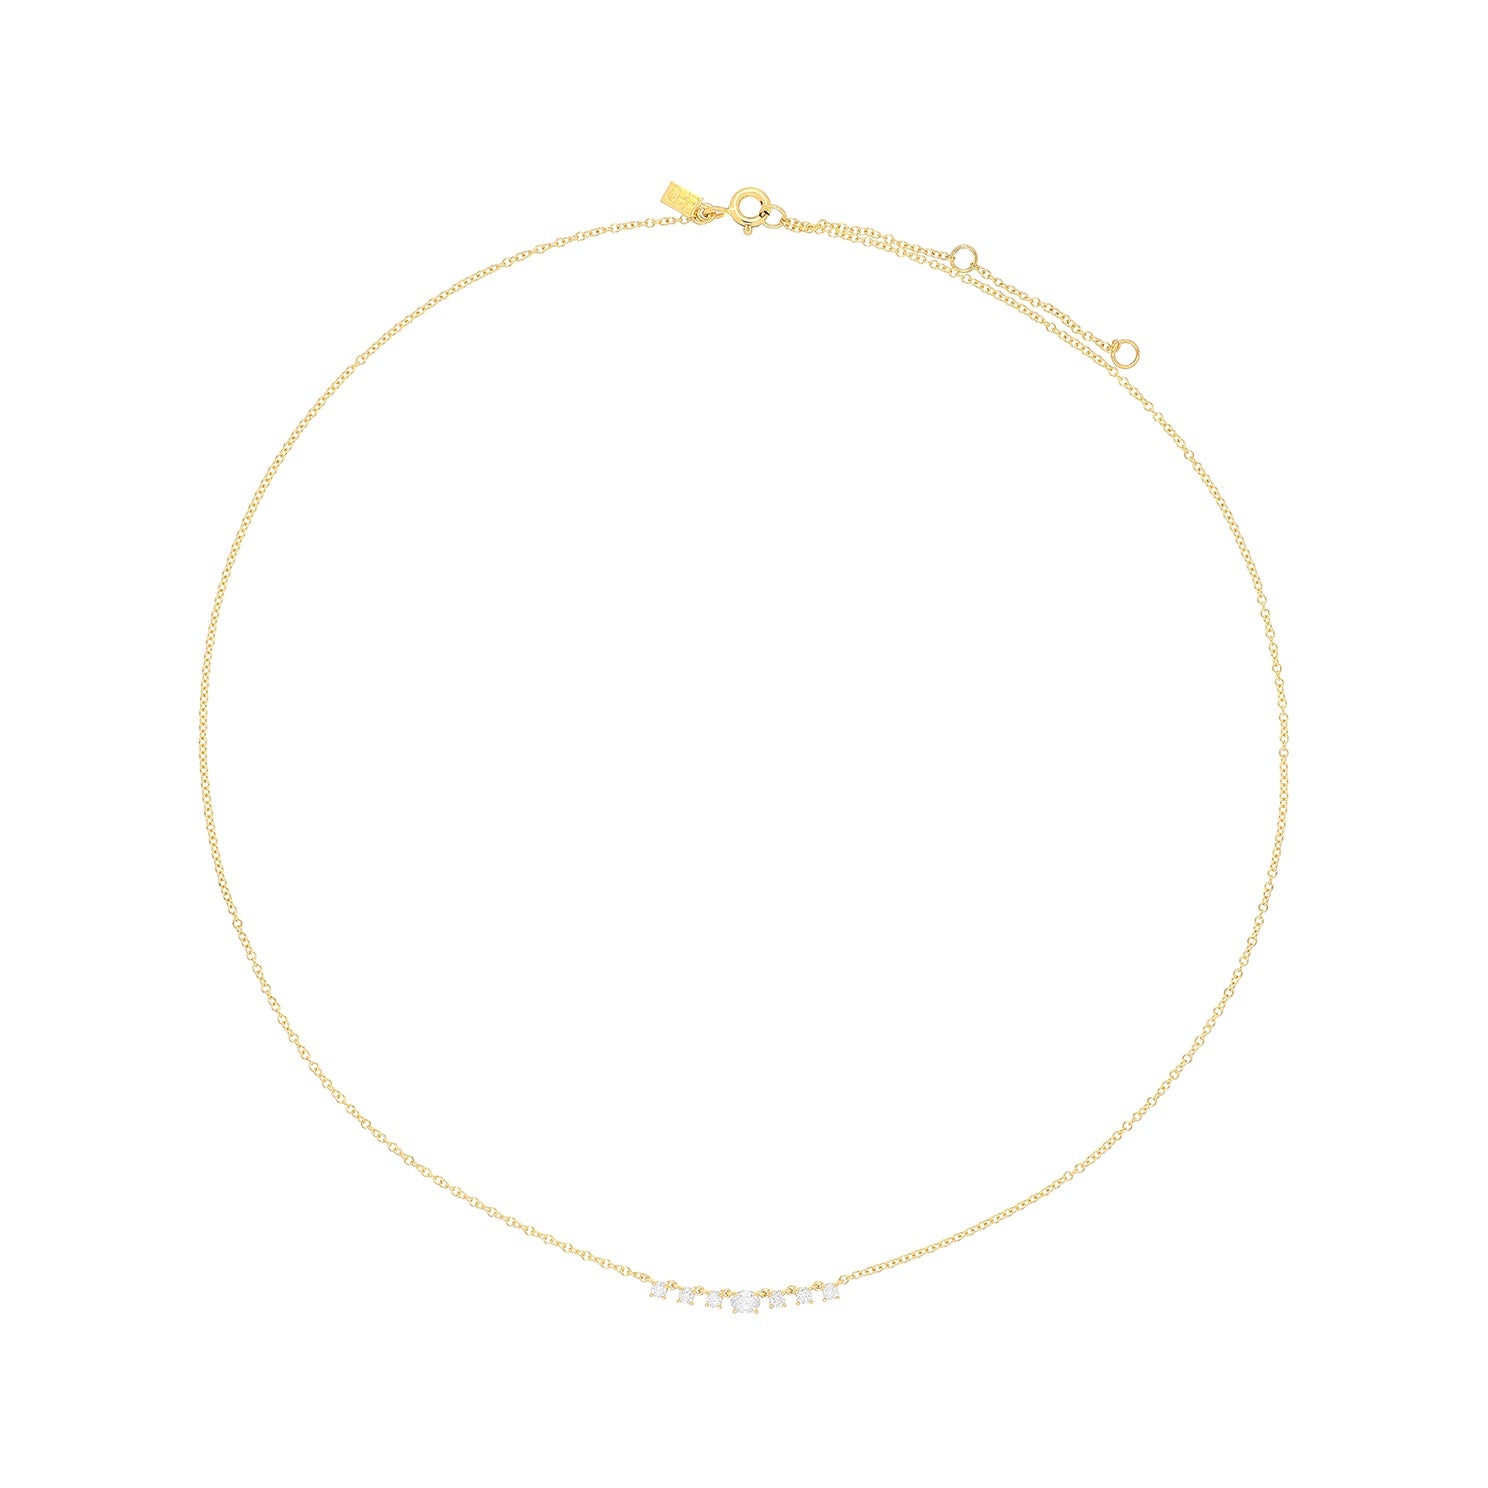 Diamond Carrie Necklace in 14k yellow gold